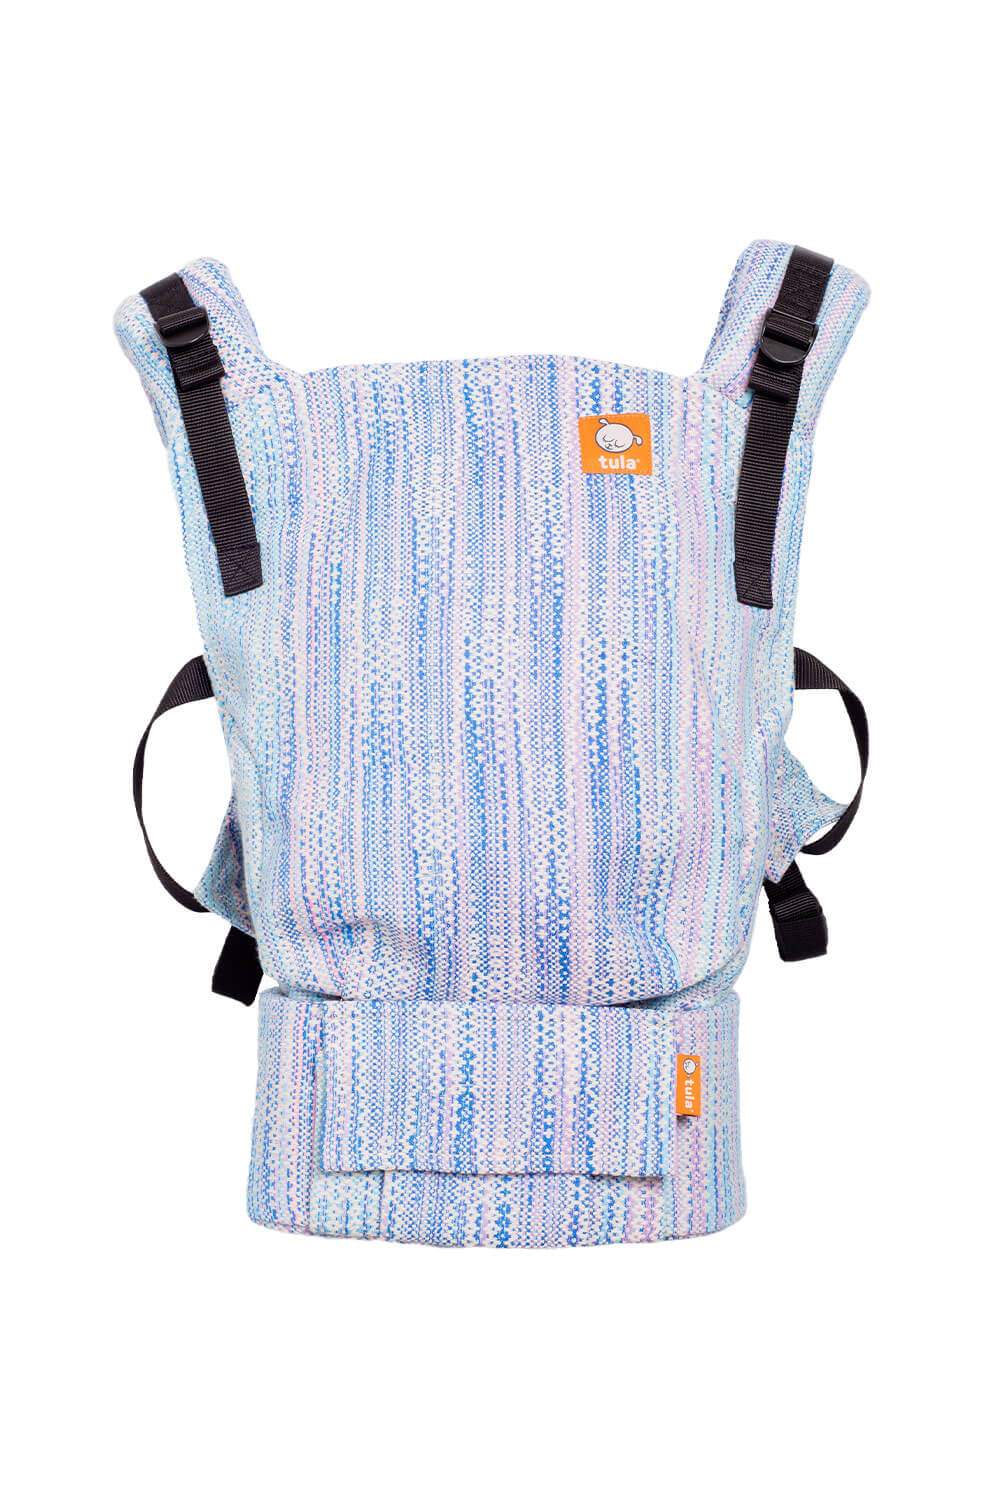 Harmony Ice Flower - Signature Woven Free-to-Grow Baby Carrier